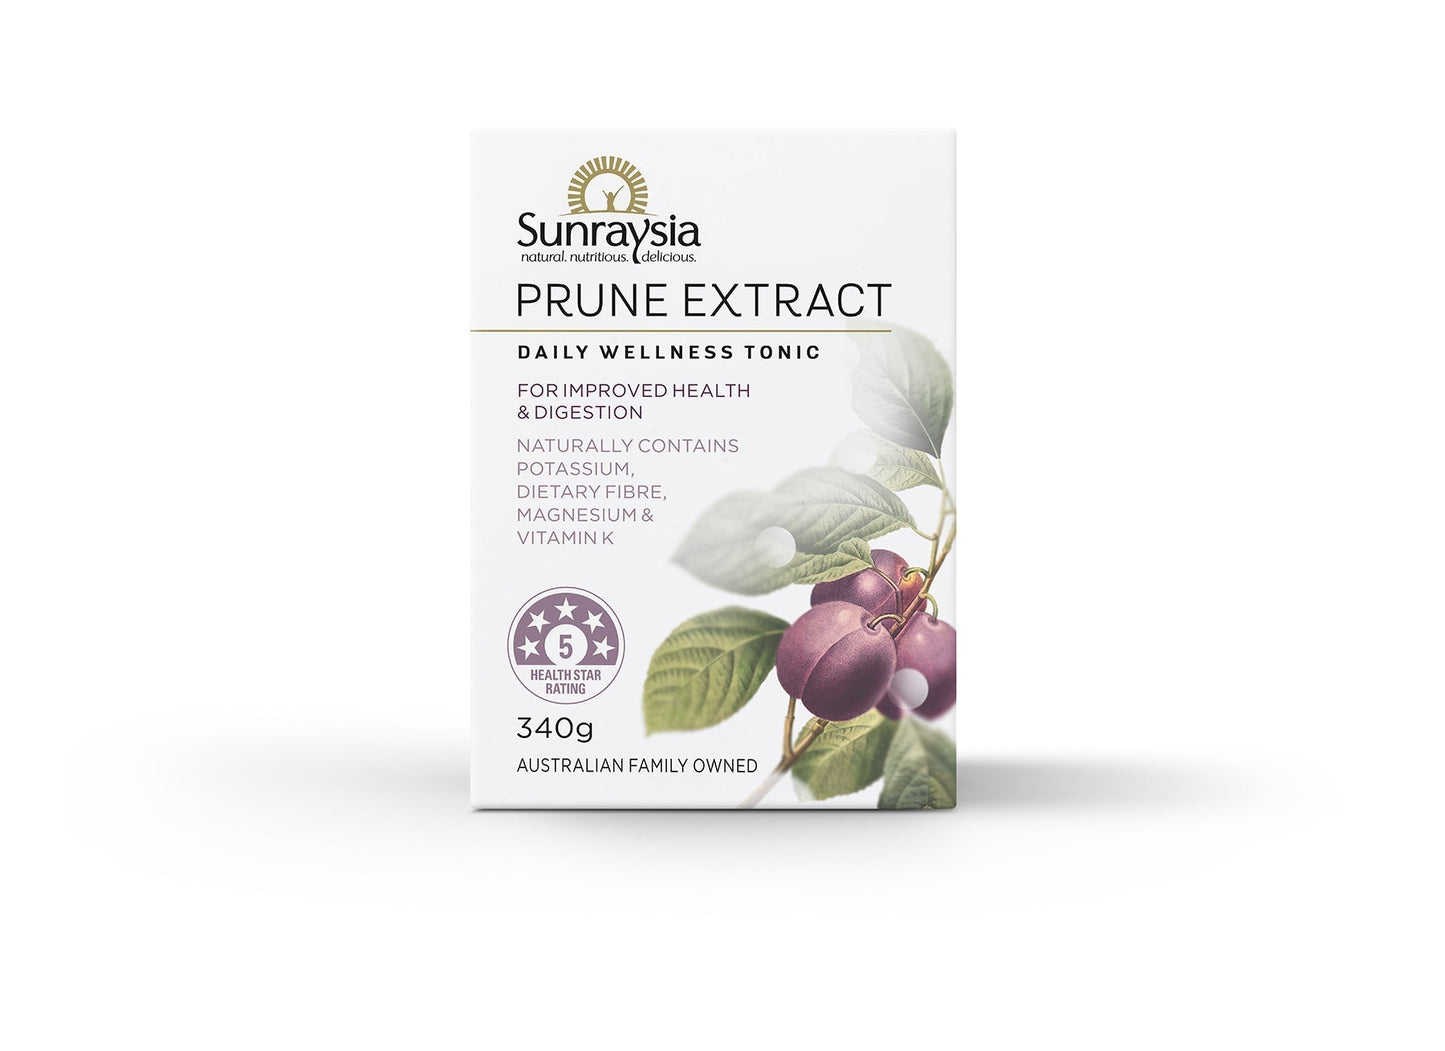 Sunraysia Prune Extract - Natural constipation relief 🌿